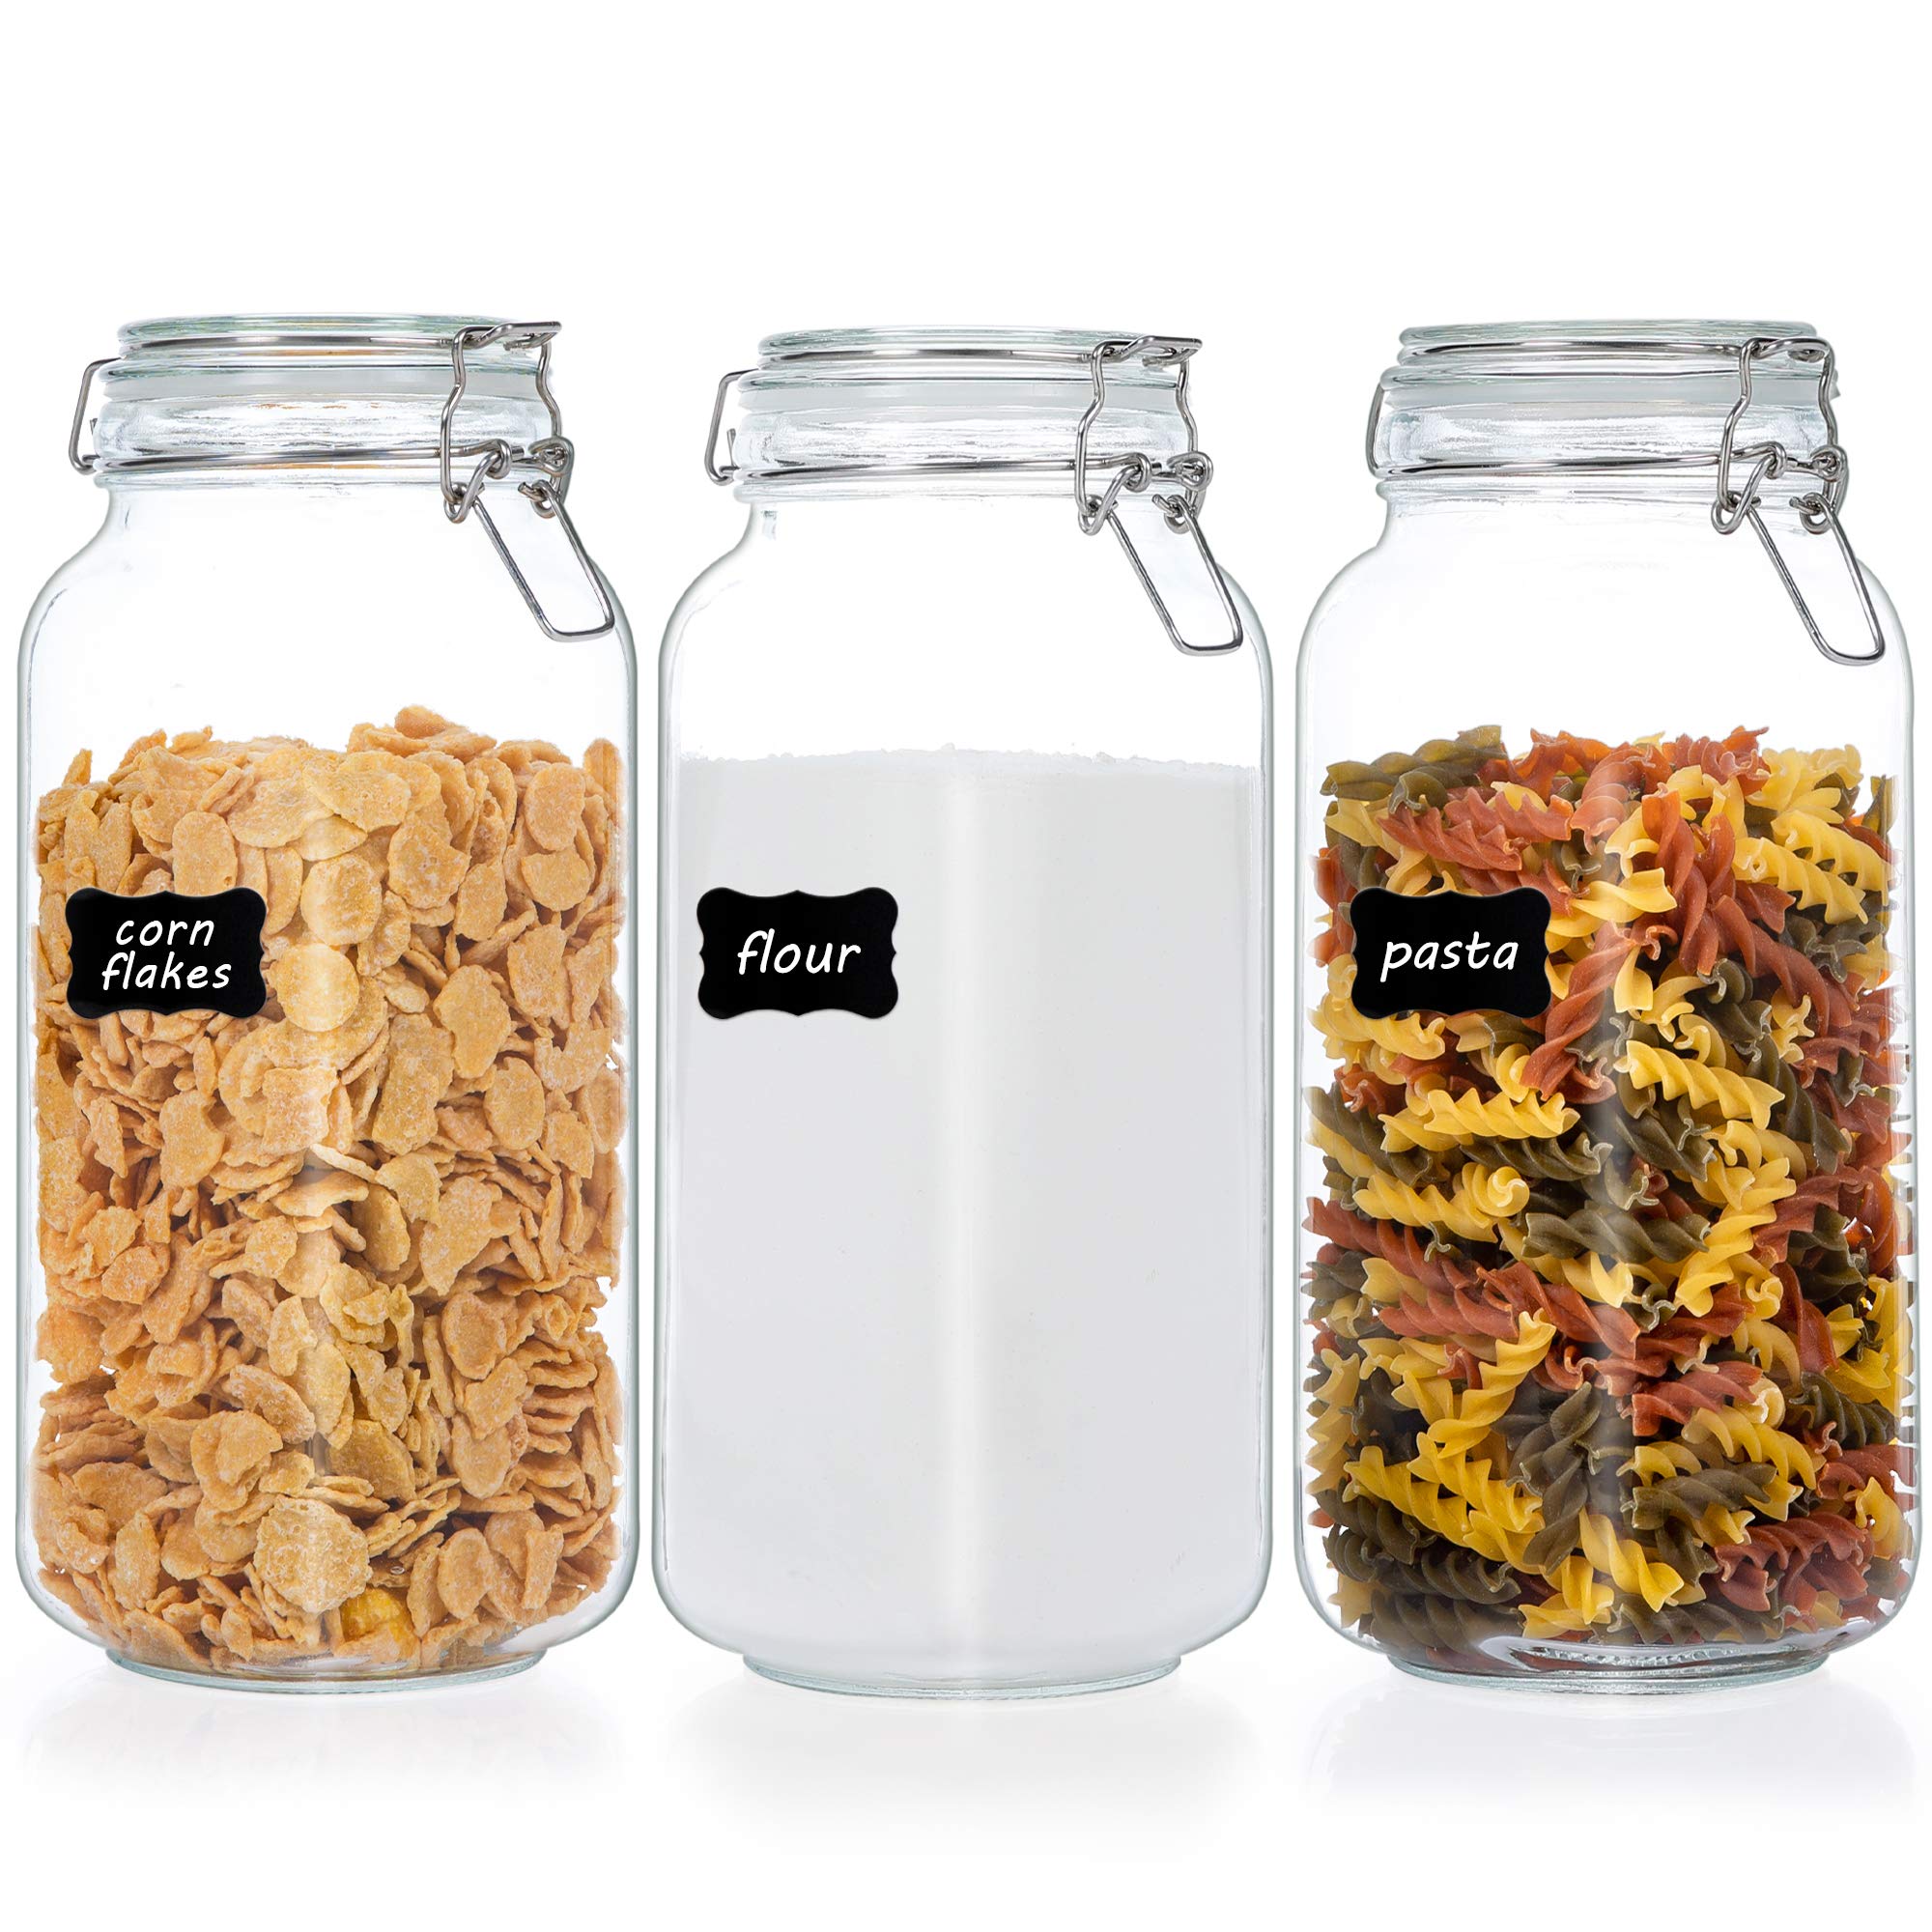 78oz Glass Food Storage Jars with Airtight Clamp Lids, 3 Pack Large Kitchen Canisters for Flour, Cereal, Coffee, Pasta and Canning, Square Mason Jars with 8 Chalkboard Labels